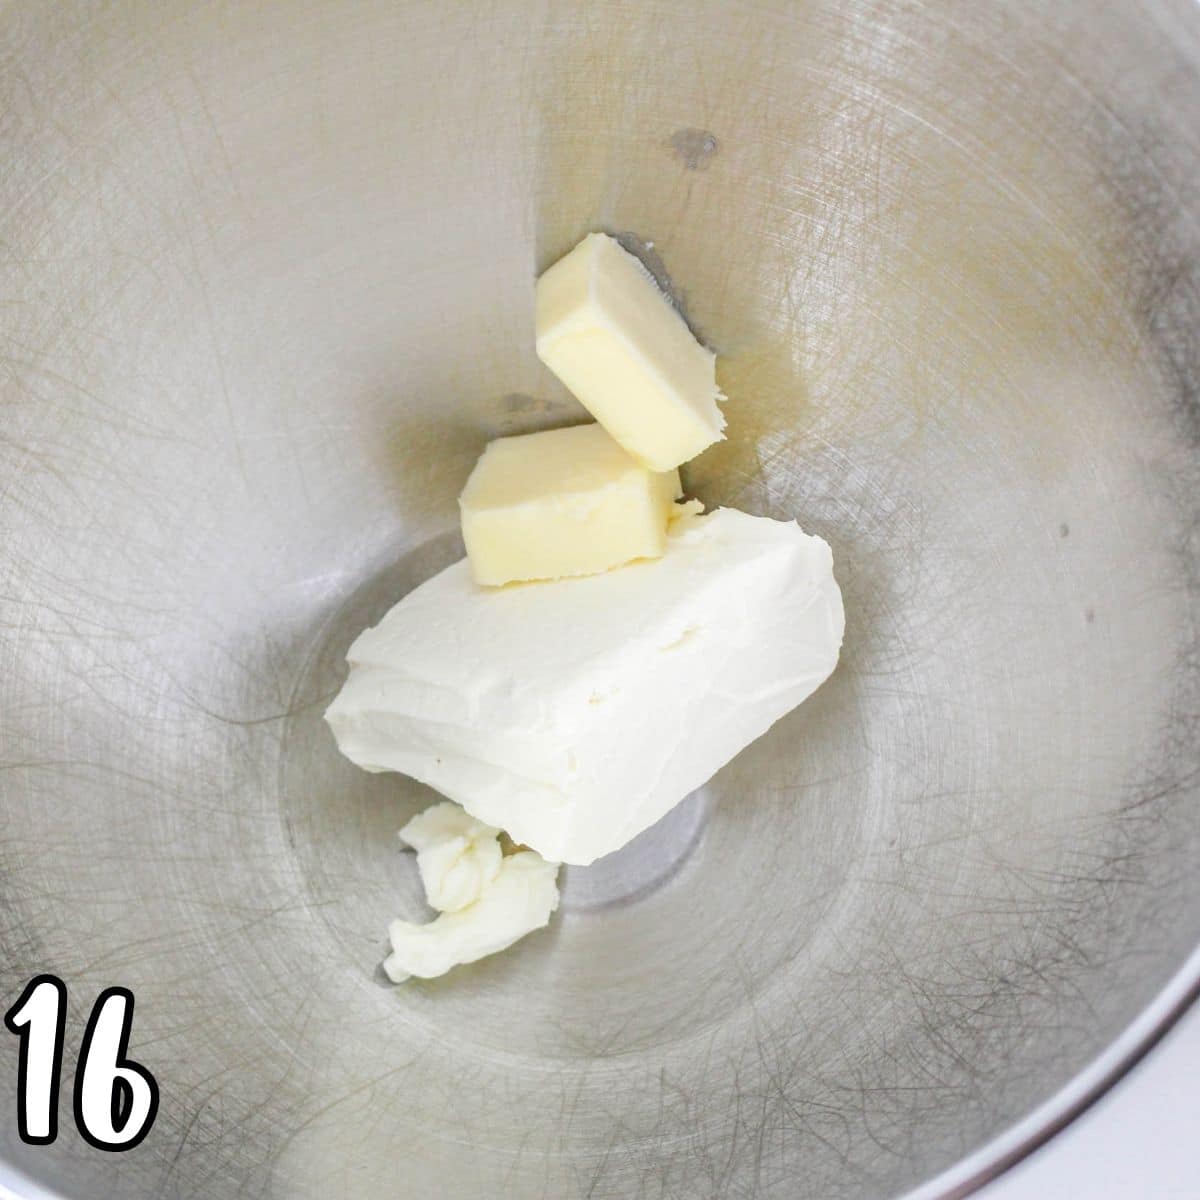 Cream cheese and butter in a metal mixing bowl. 